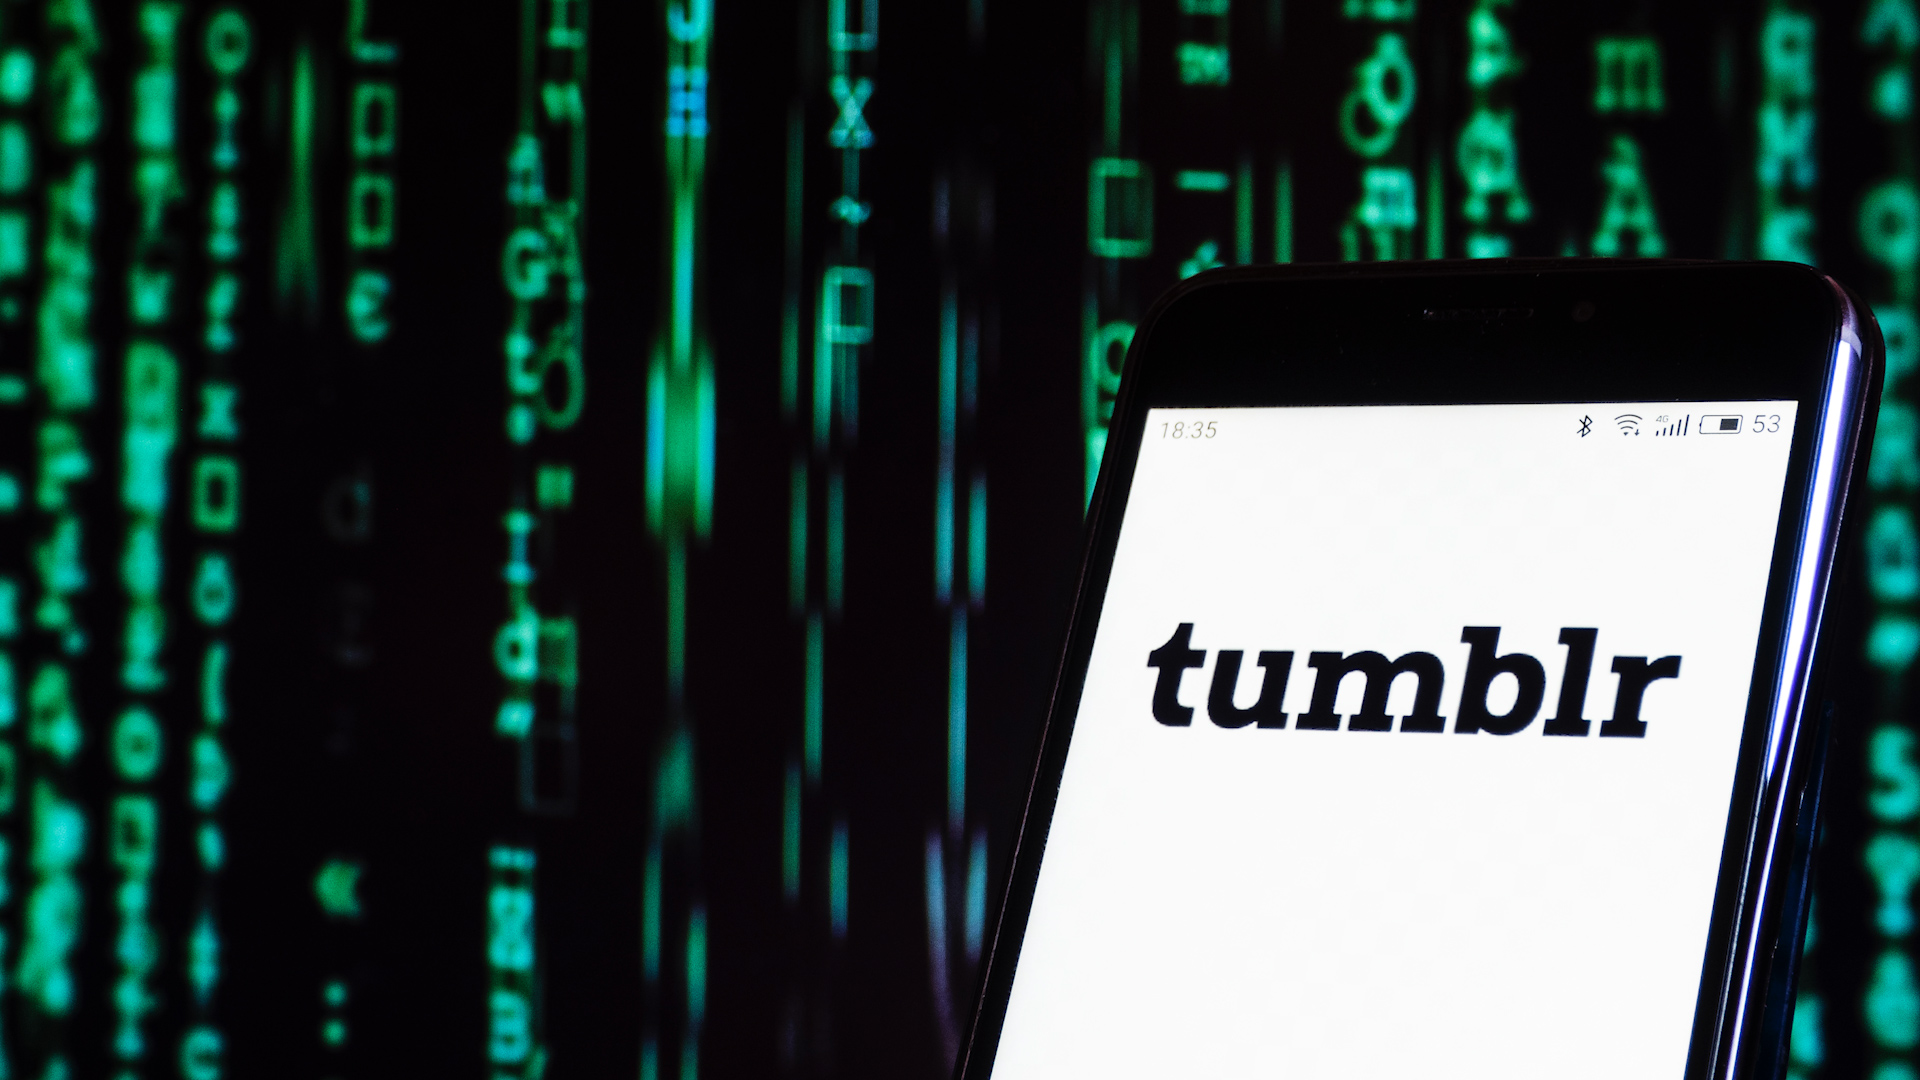 Perhaps Tumblr should focus on other, more problematic content it advocates for. (Image via Mashable)